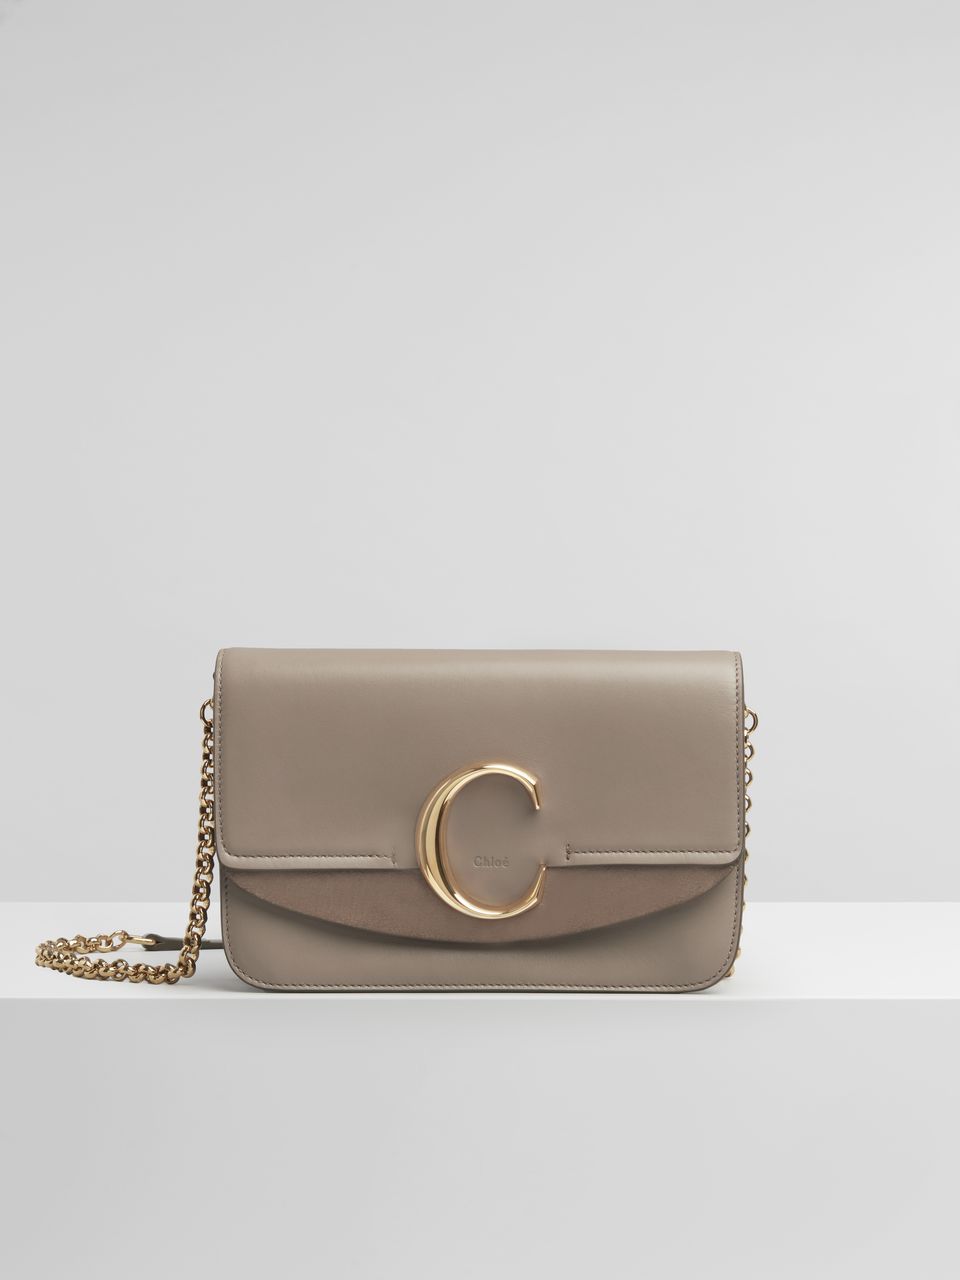 Chloe's Spring 2019 Bags Double Down on the Brand's New C Logo